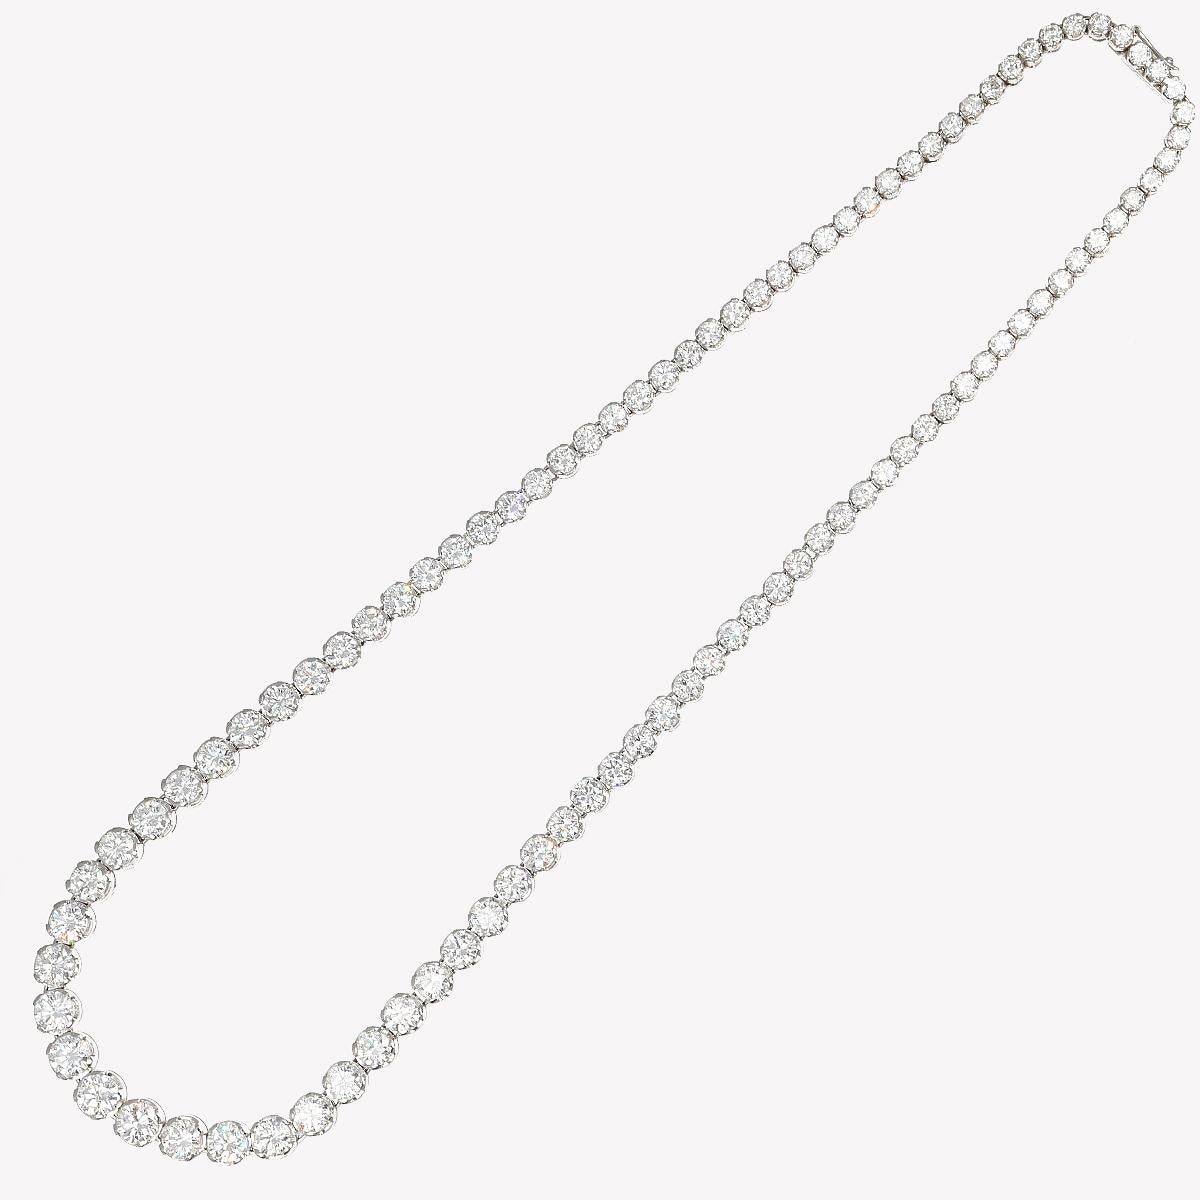 A symphony of light and luxury unveils itself in this graduated tennis necklace, a jewel that embodies the pinnacle of understated elegance and timeless allure. Each carefully chosen diamond sparkles with an intensity that captures the gaze and